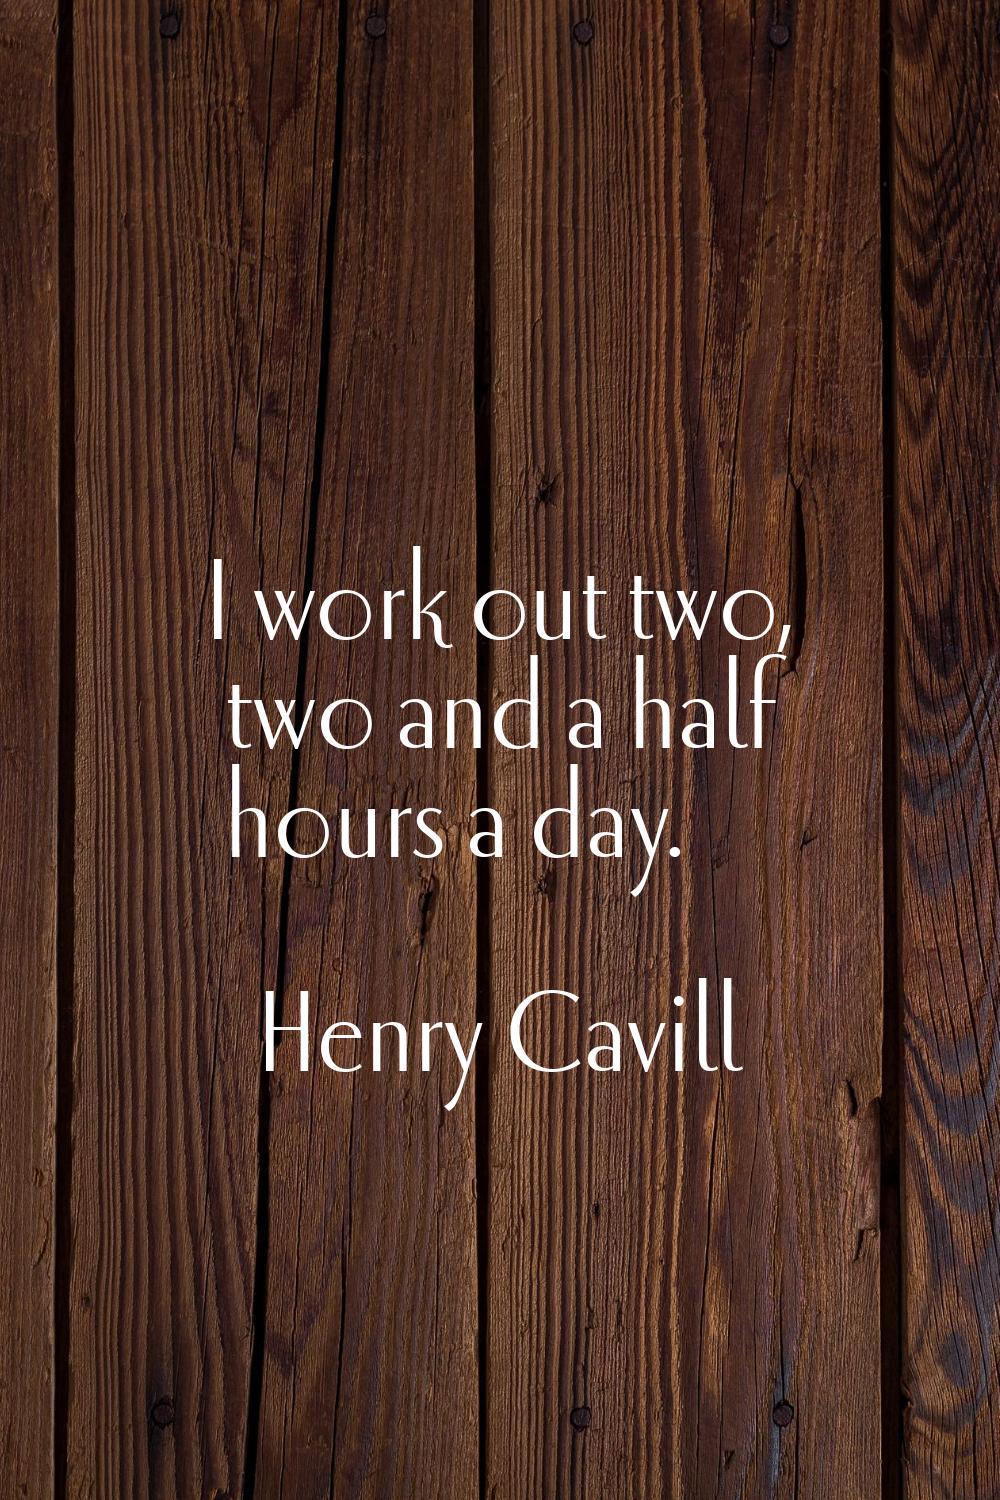 I work out two, two and a half hours a day.